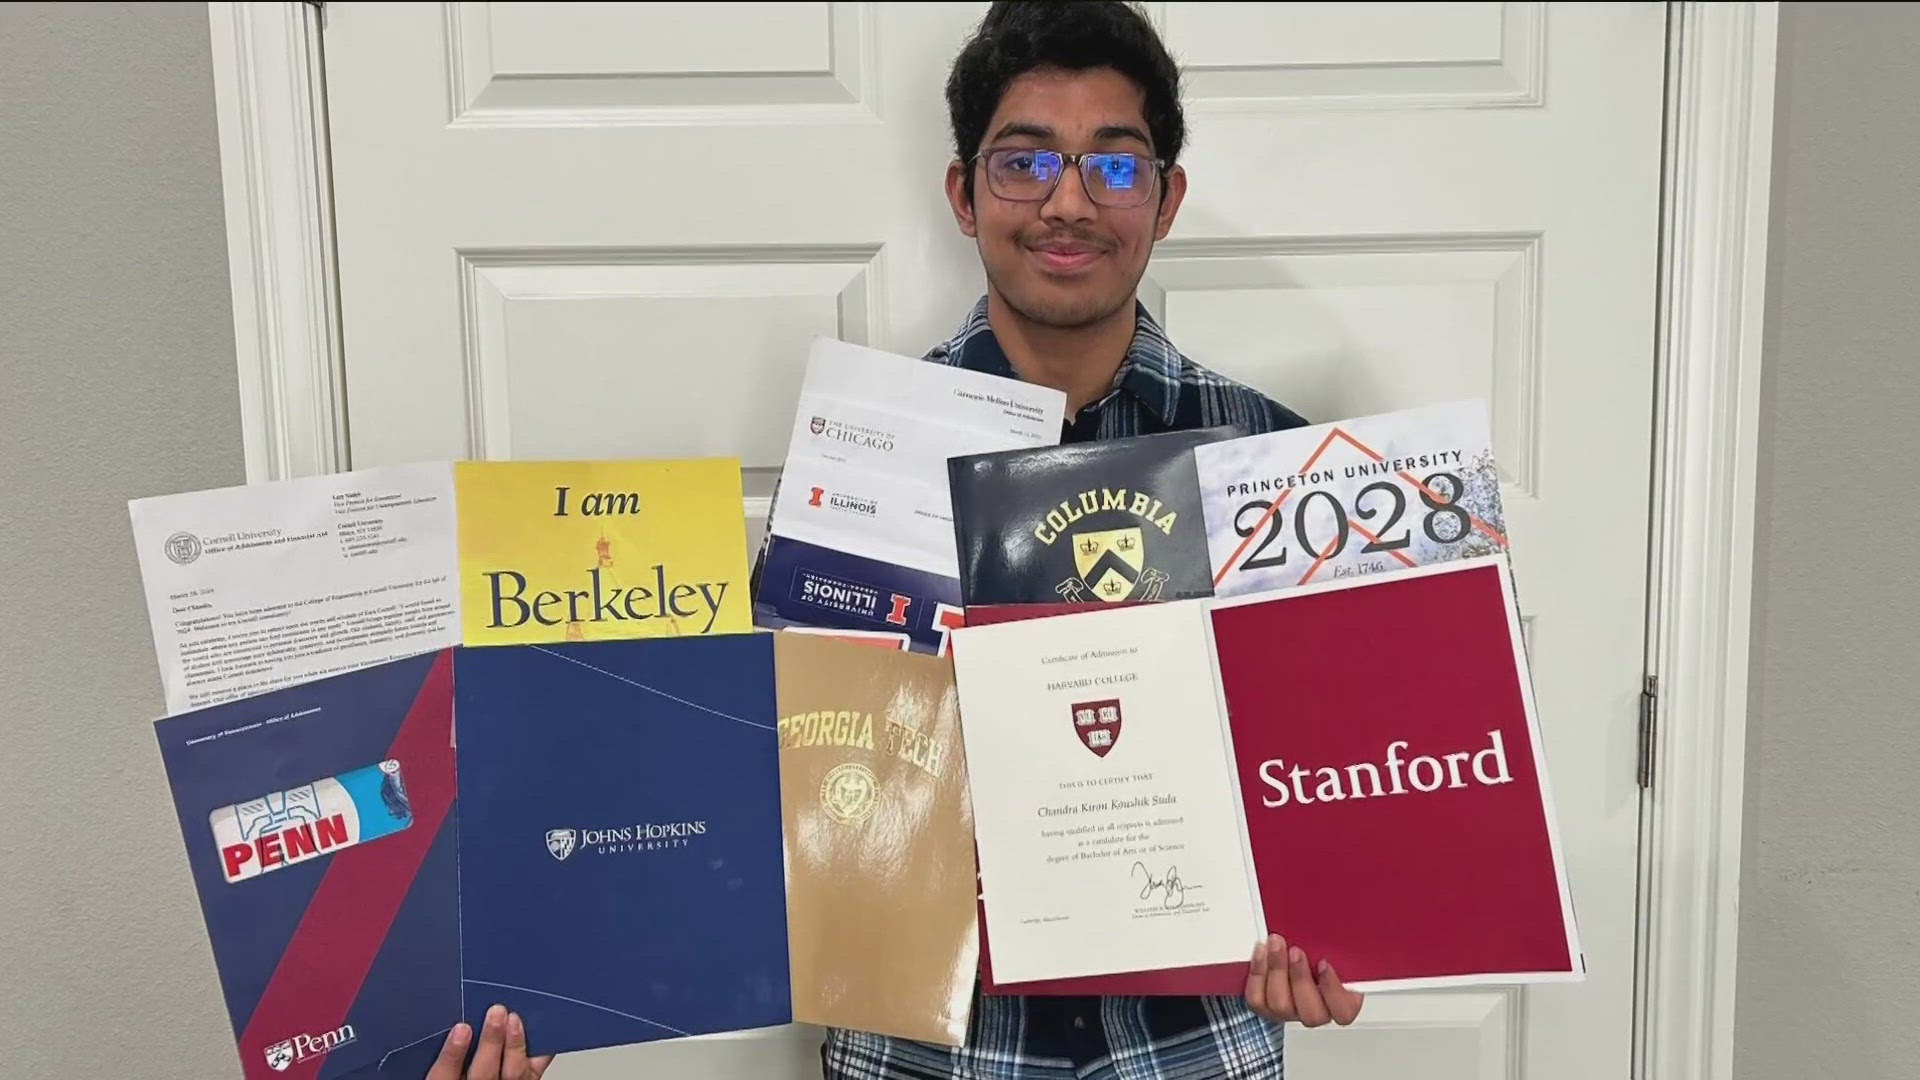 A Bentonville High School senior has tough decision after multiple prestigious universities accept him. Watch the video to learn which ones.